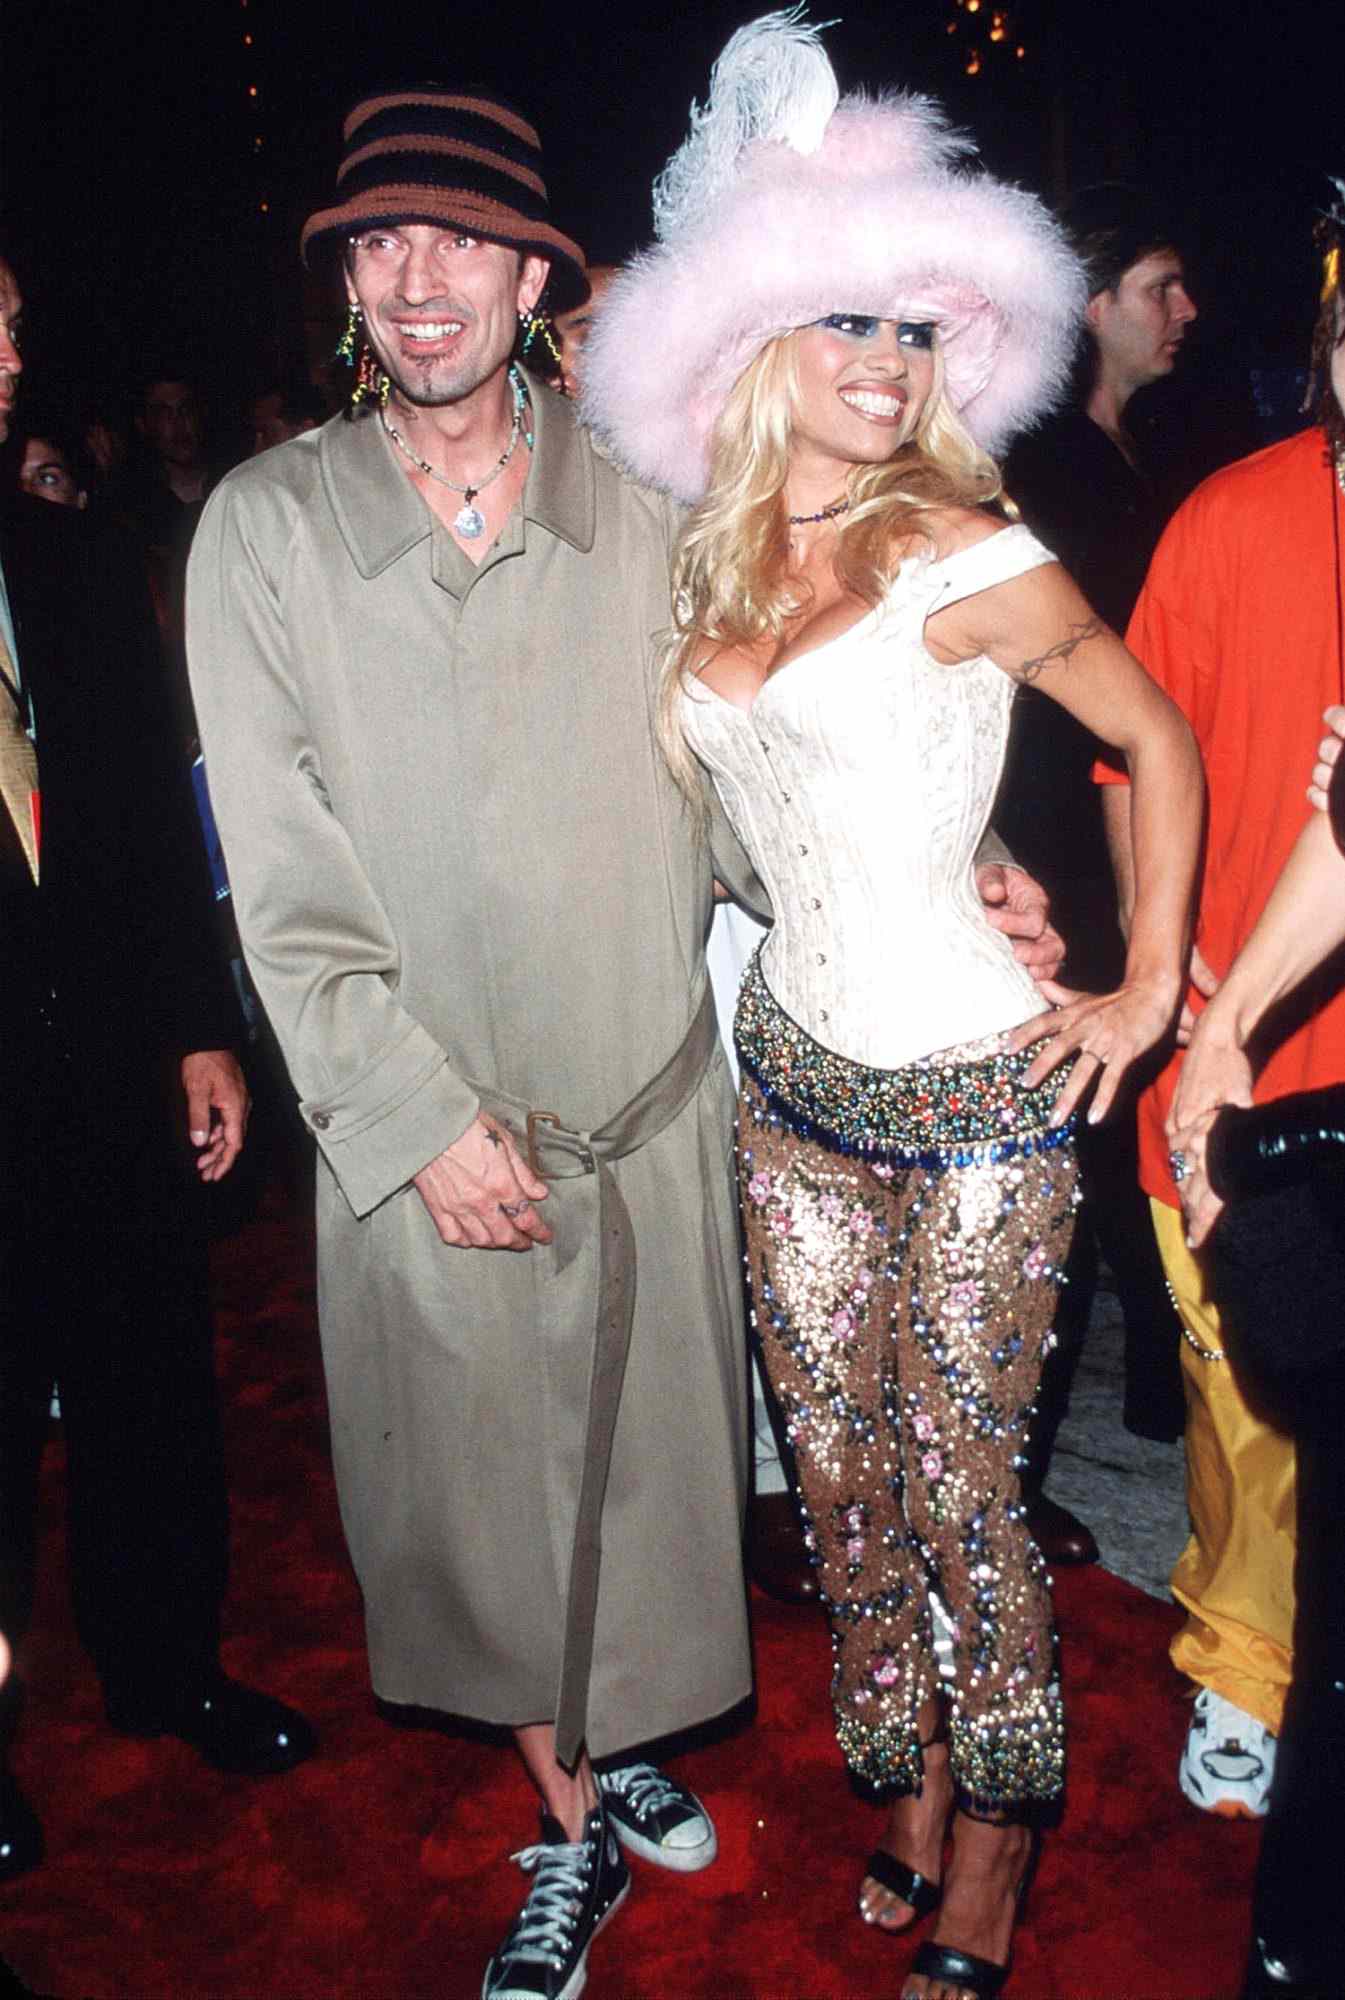 Pamela Anderson poses for a picture with husband Tommy Lee on September 9, 1999 at the MTV Video Music Awards